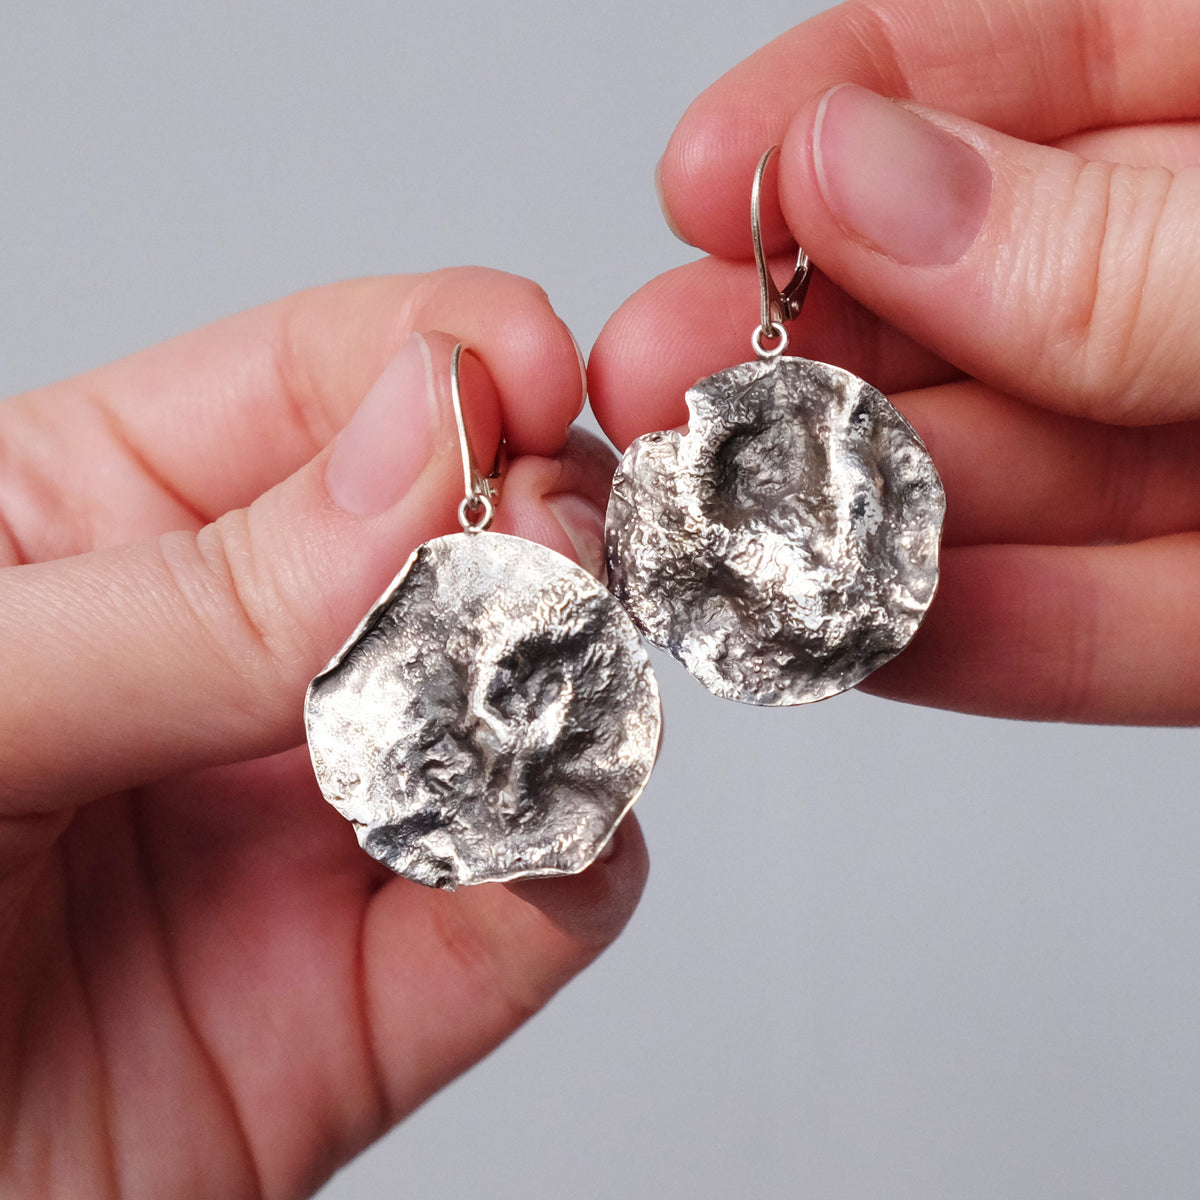 Melted Disc Planetary Leverback Earrings